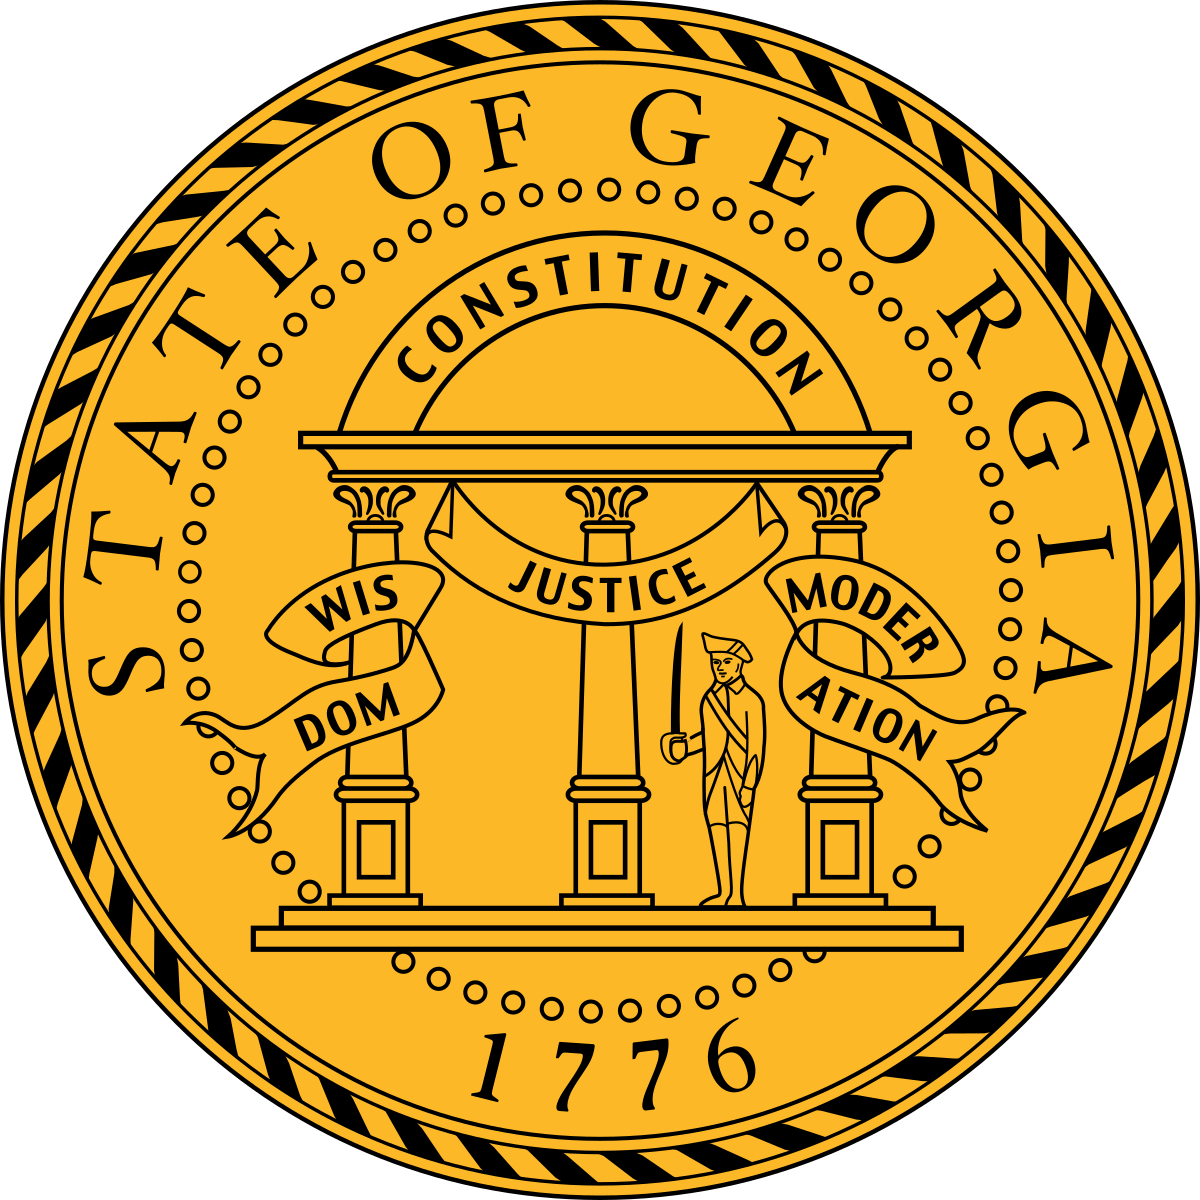 1200px-Seal_of_Georgia.svg.png